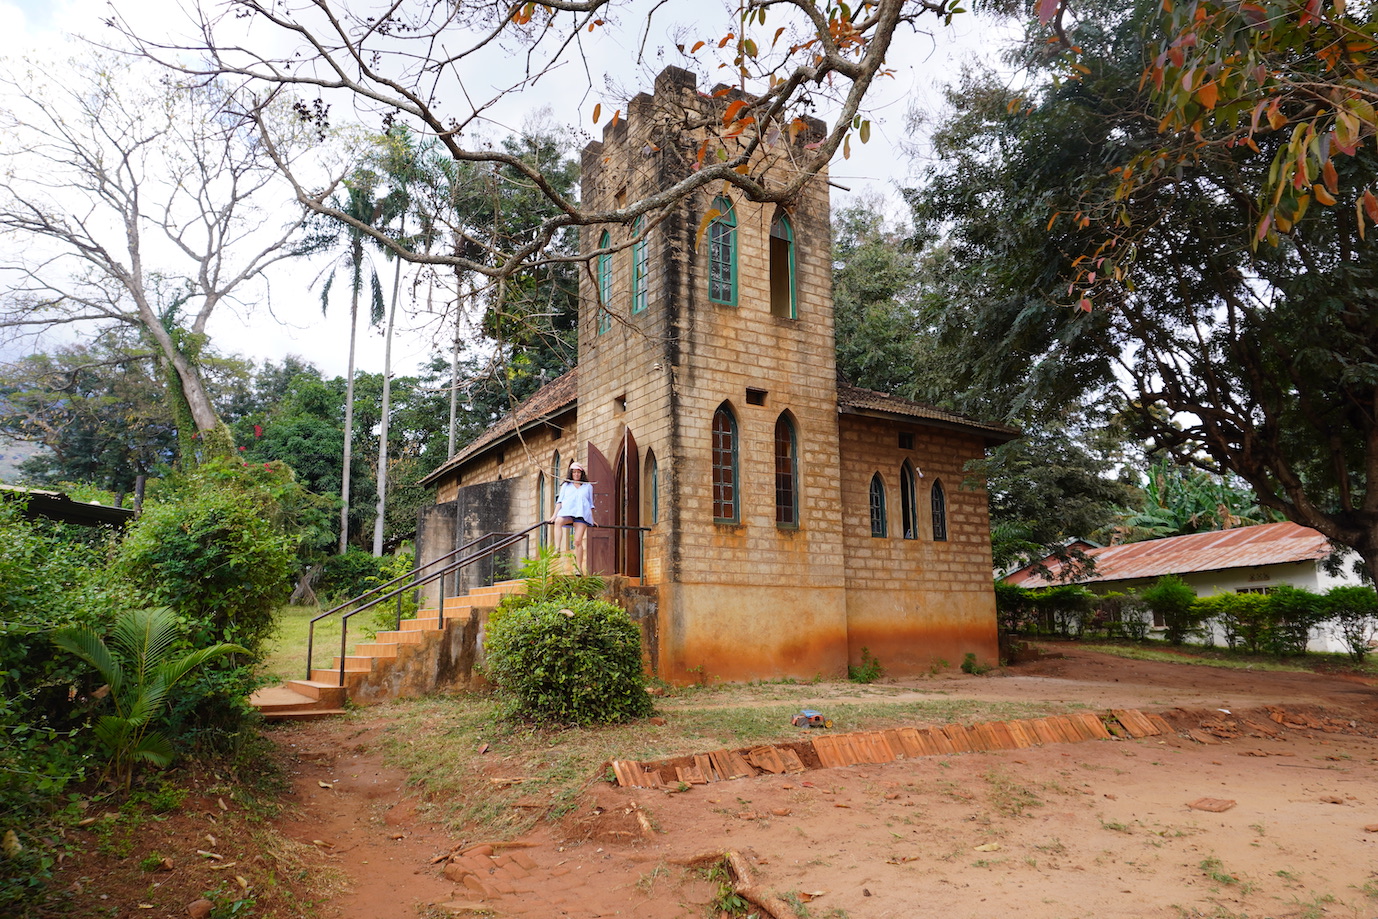 A beautiful church in Morogoro and some trees around